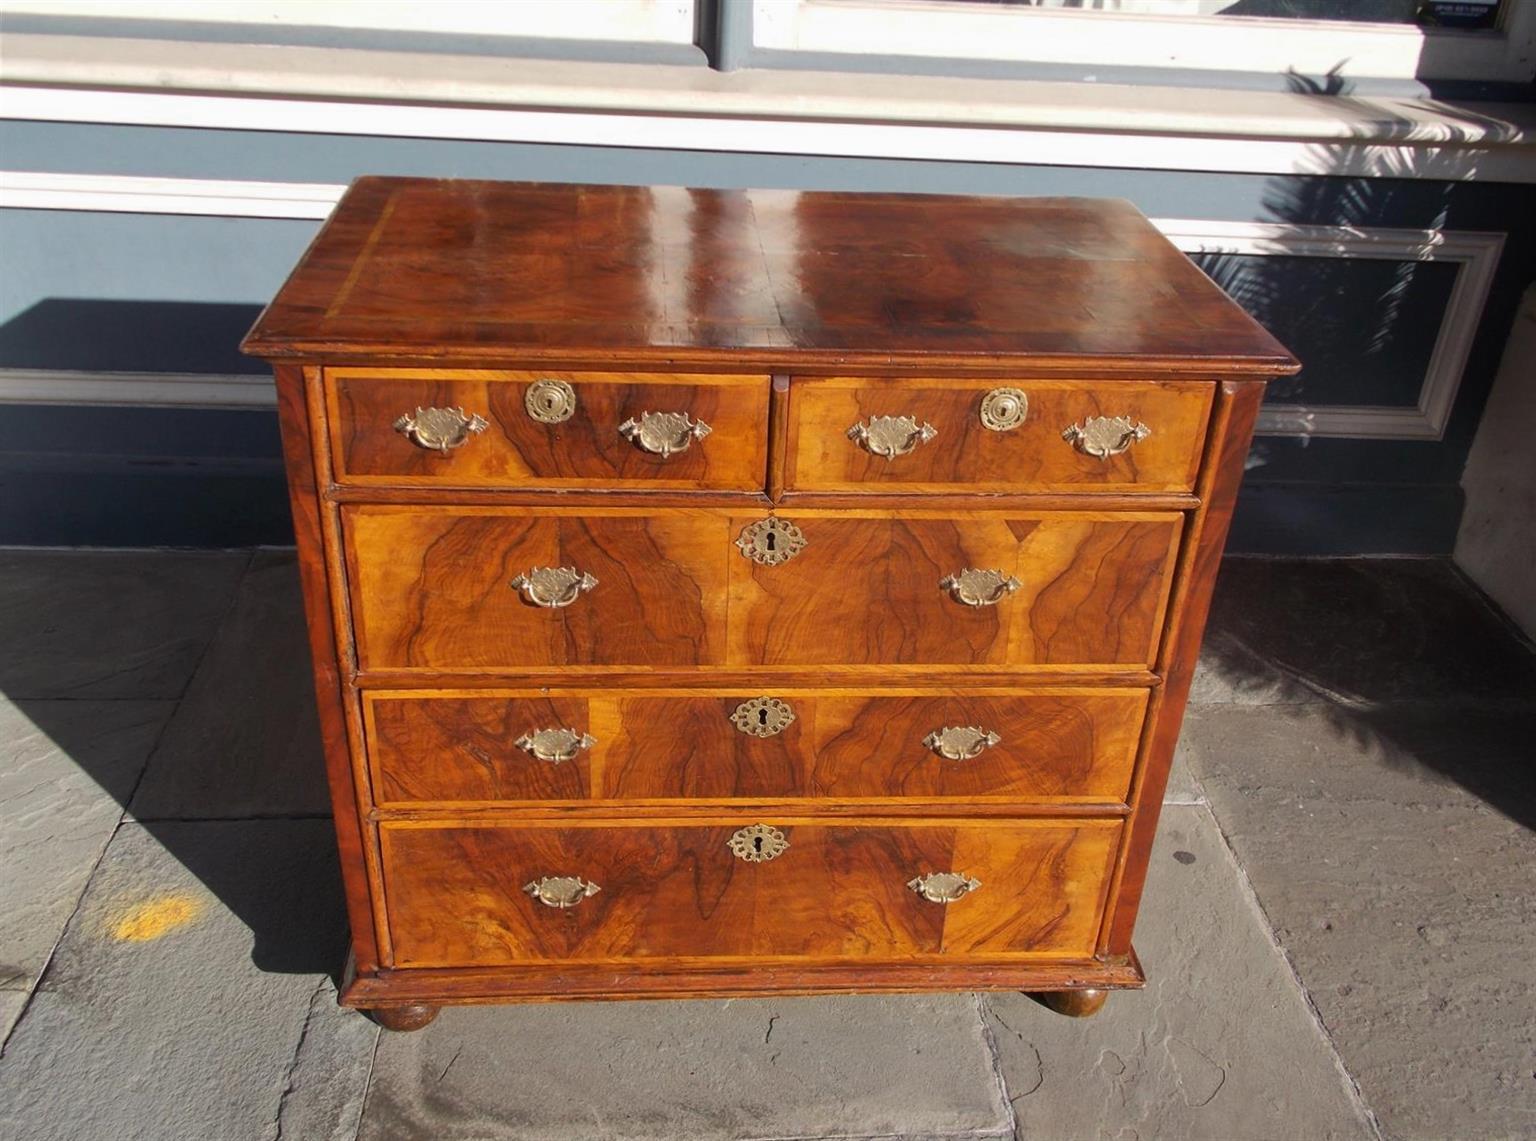 English Queen Anne book matched burl walnut five-drawer chest with a carved molded edge, original brasses and escutcheons, feather banded satinwood inlays, and resting on bun feet, Mid-18th century.